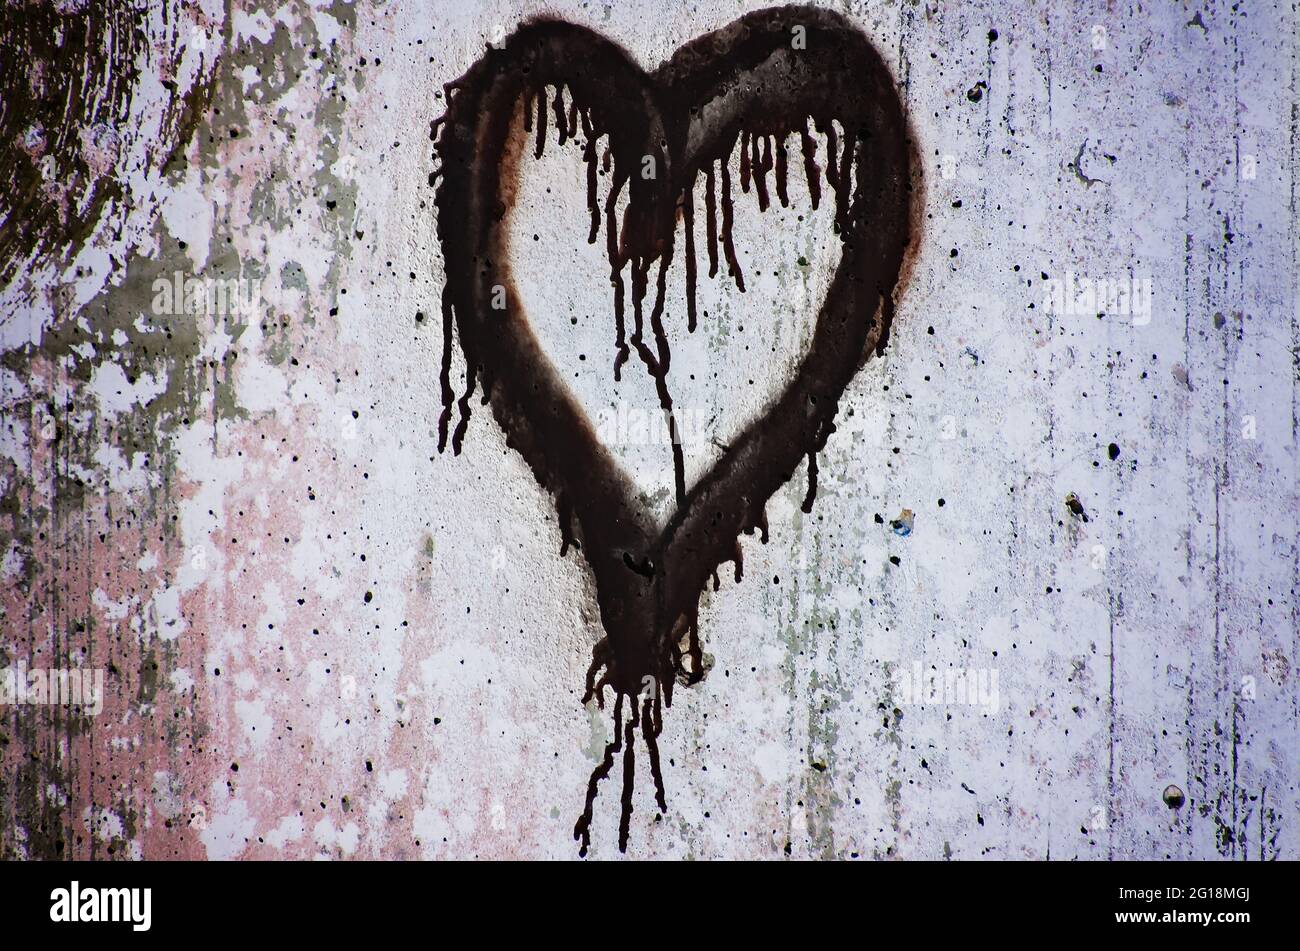 A heart is spray-painted on a wall, May 30, 2021, in Biloxi, Mississippi. Stock Photo